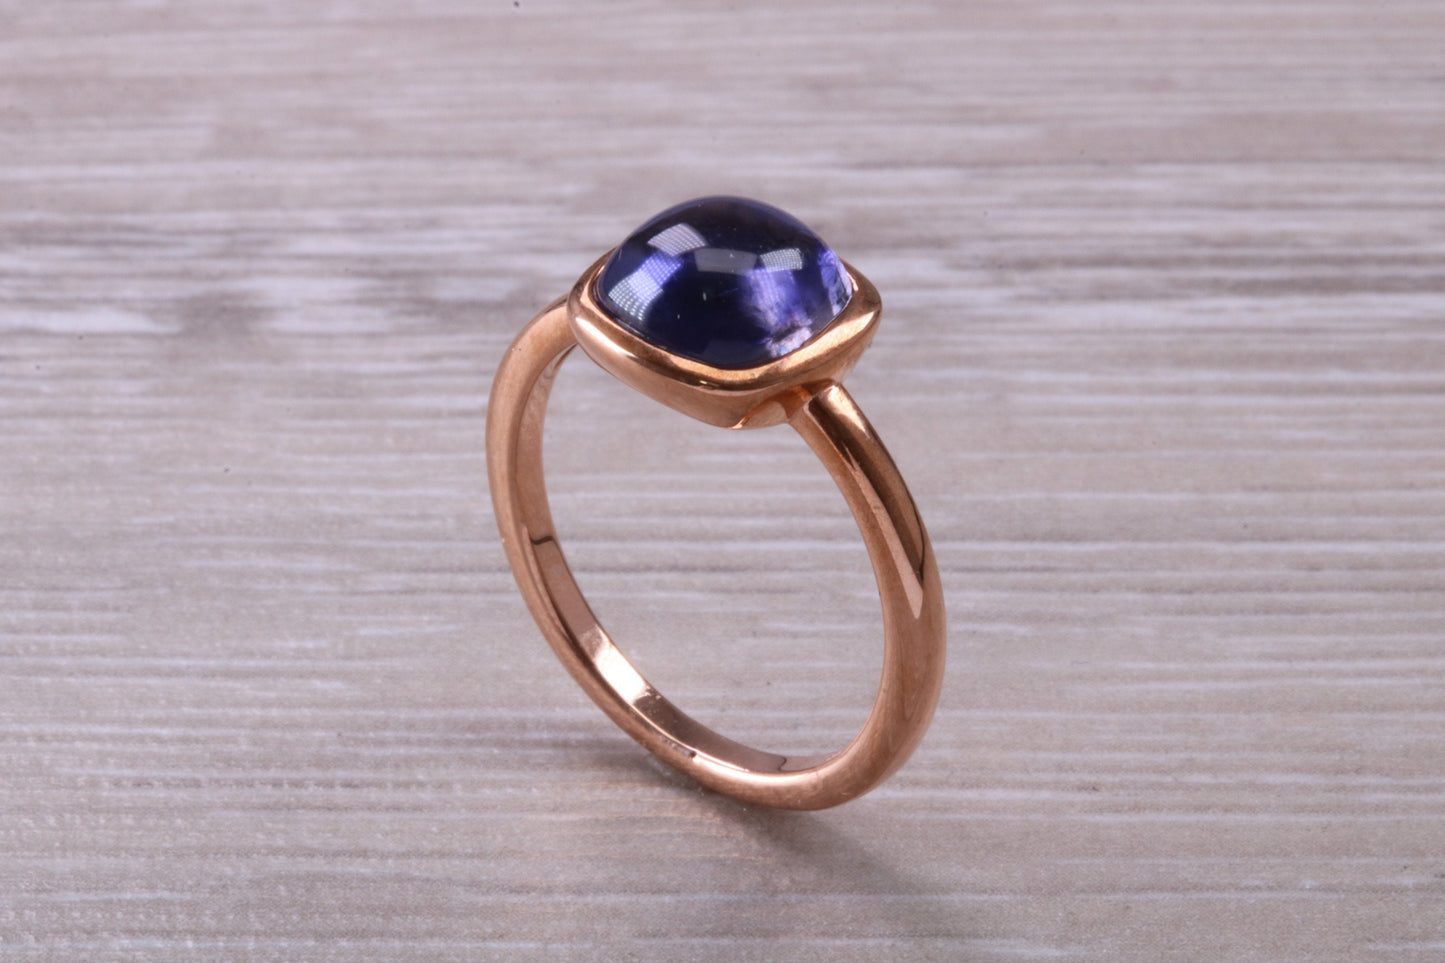 Beautiful Cabochon cut Iolite ring, solid chunky ring, made from solid 9ct Rose Gold, British hallmarked, natural Iolite